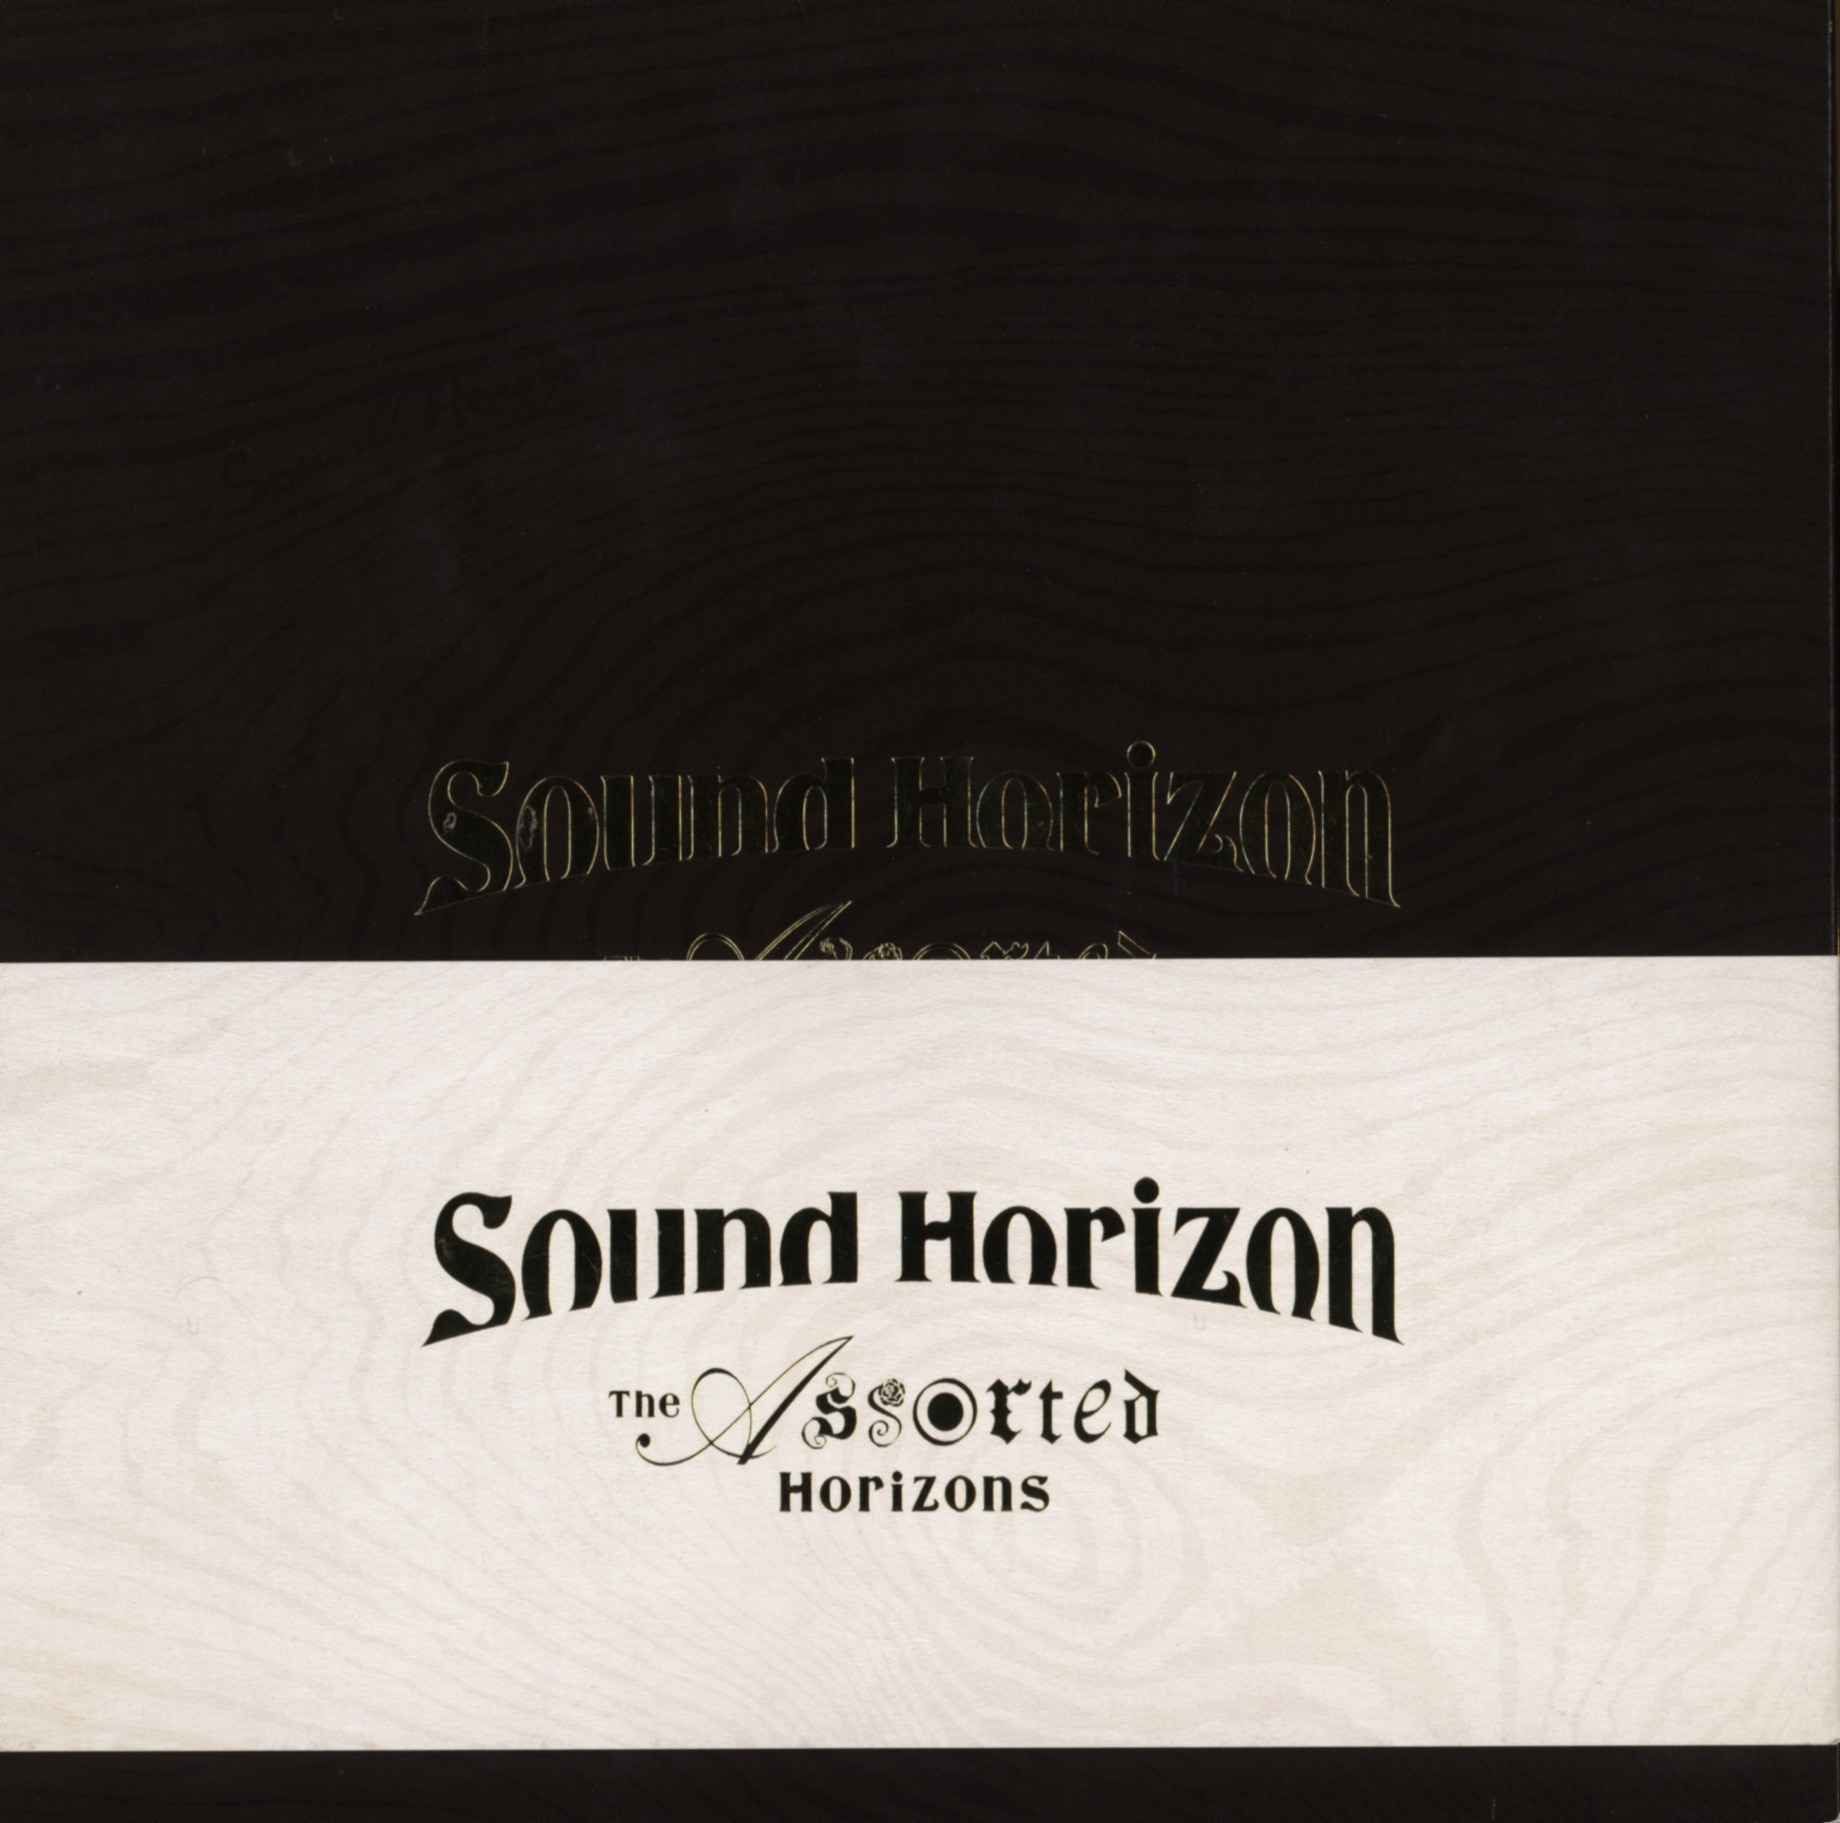 Live Blu-ray Sound Horizon [Deluxe Edition] The Assorted Horizons